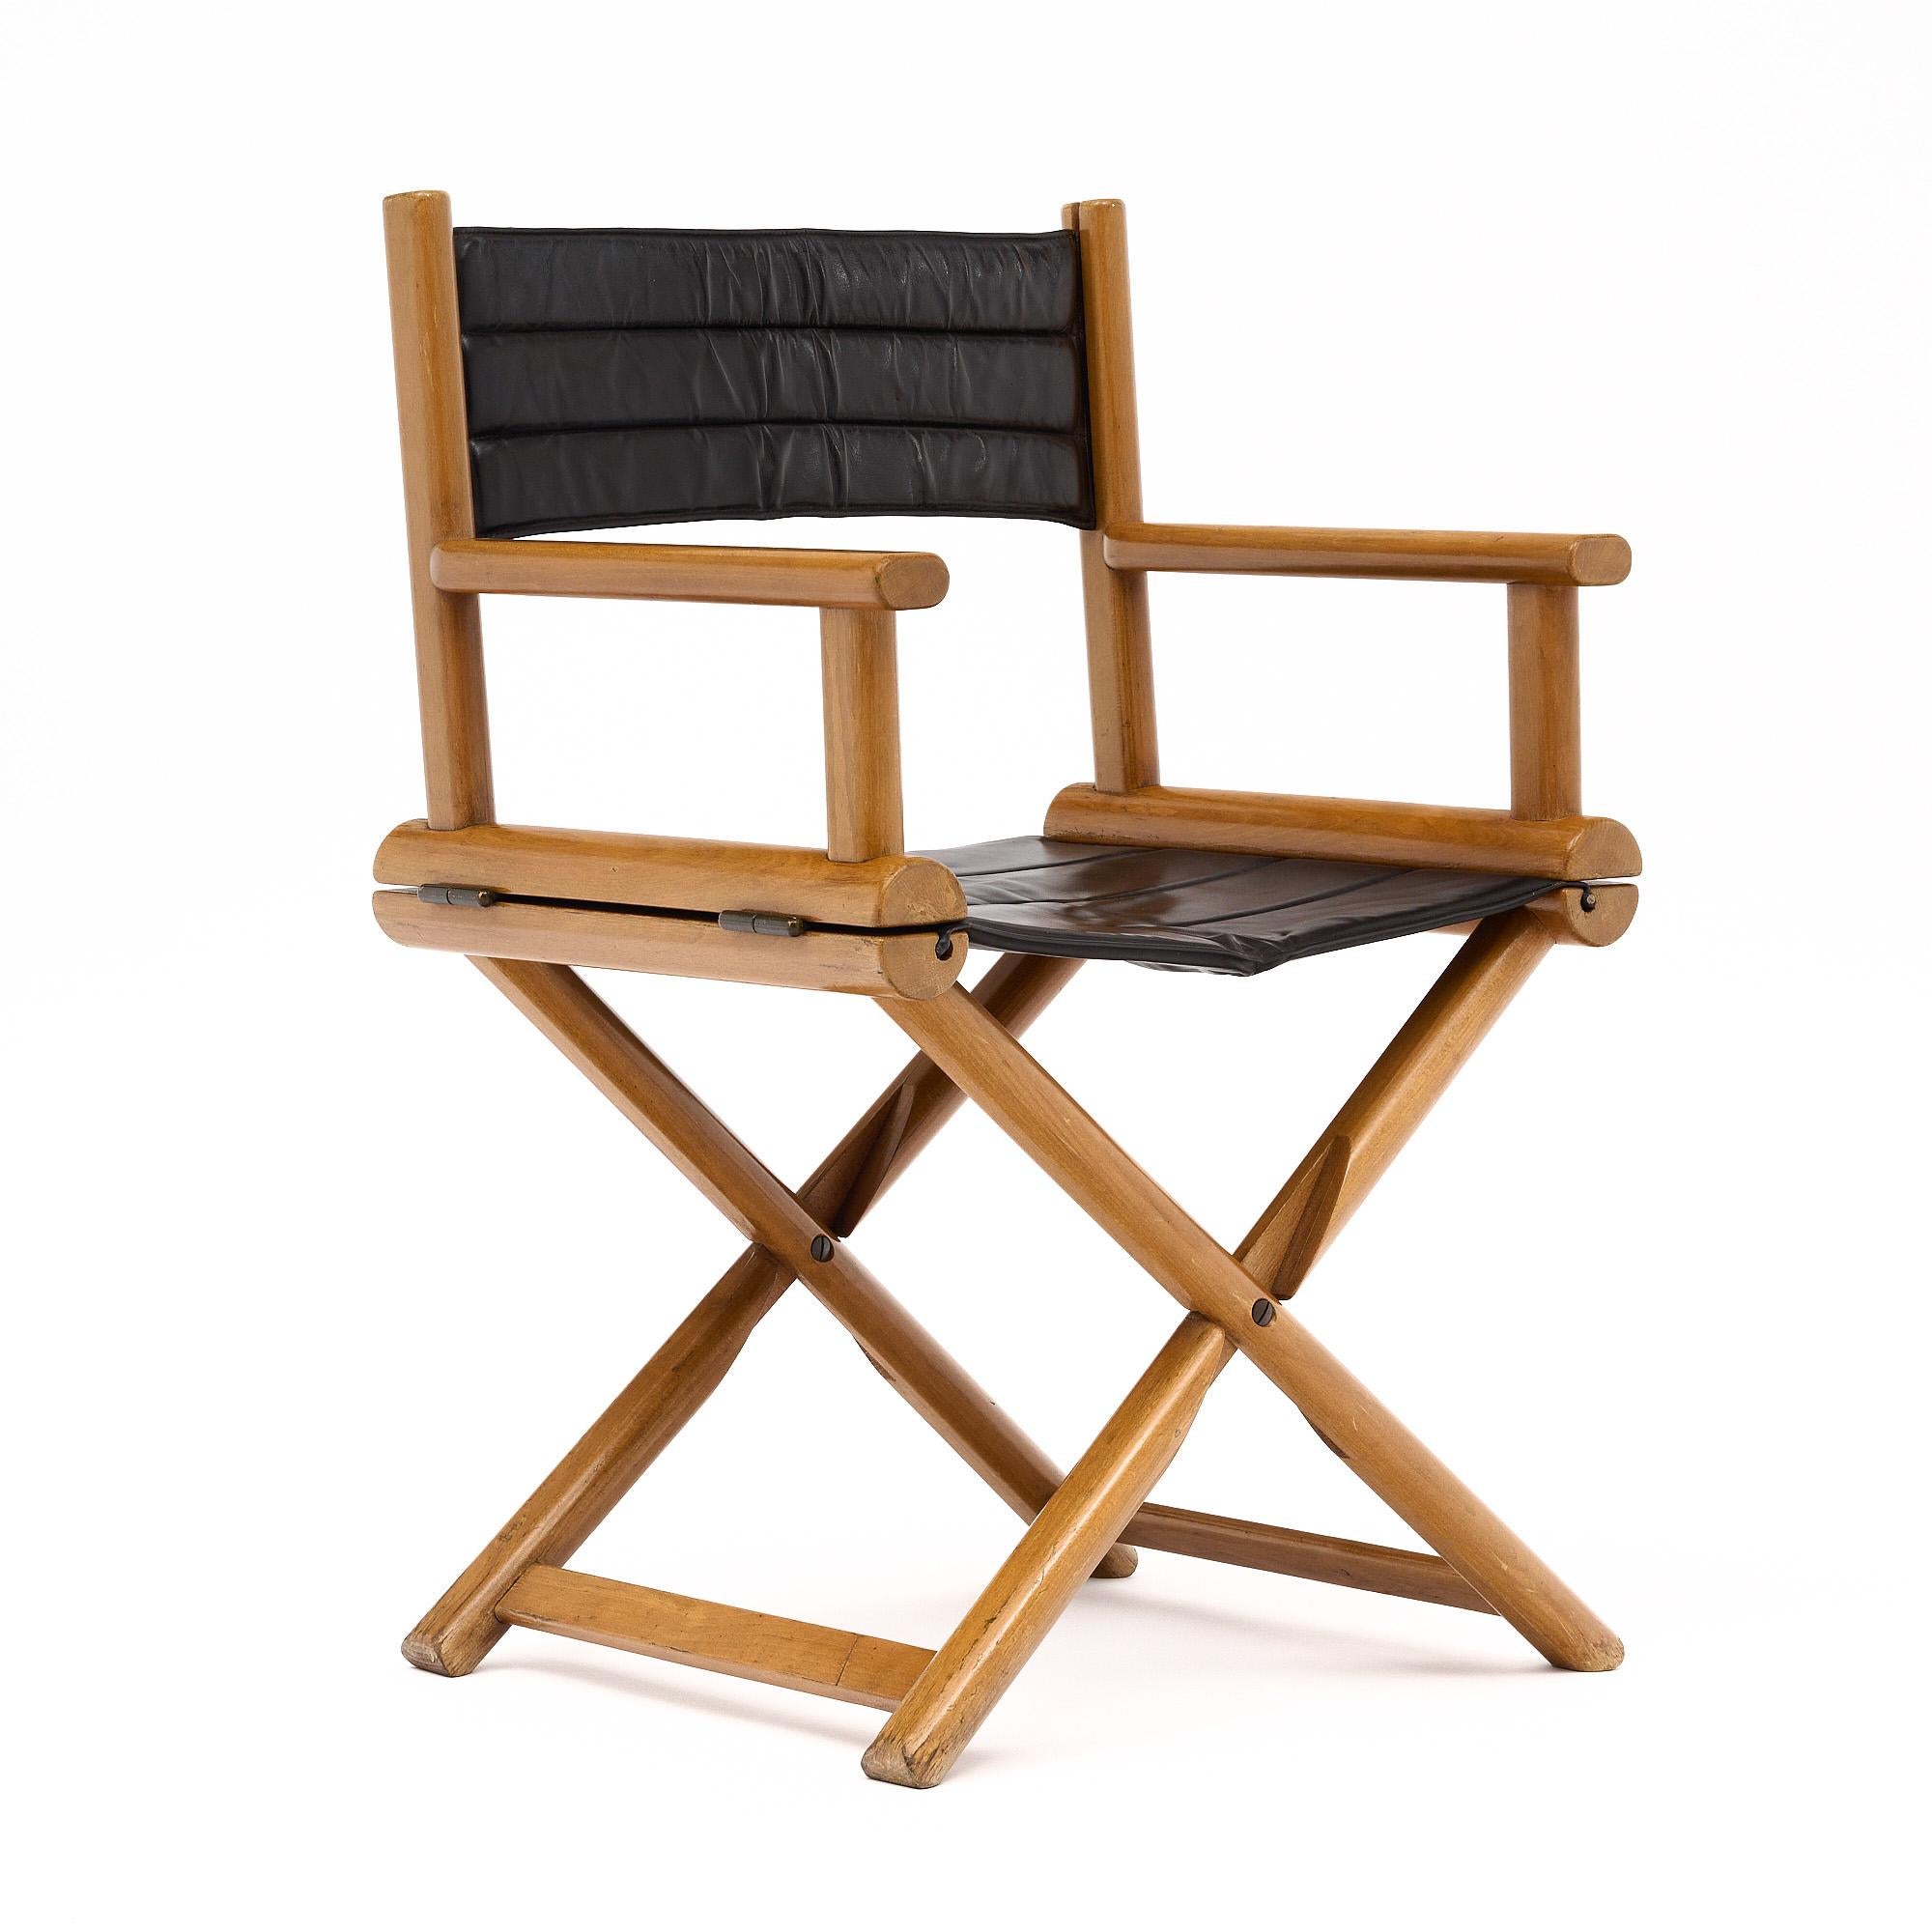 Set of four folding chairs from France made with walnut wood structures and leather seats and backs. Each comfortable chair has a classic folding chair shape with x-shaped legs. The seats and backs are upholstered in the original dark brown stitched